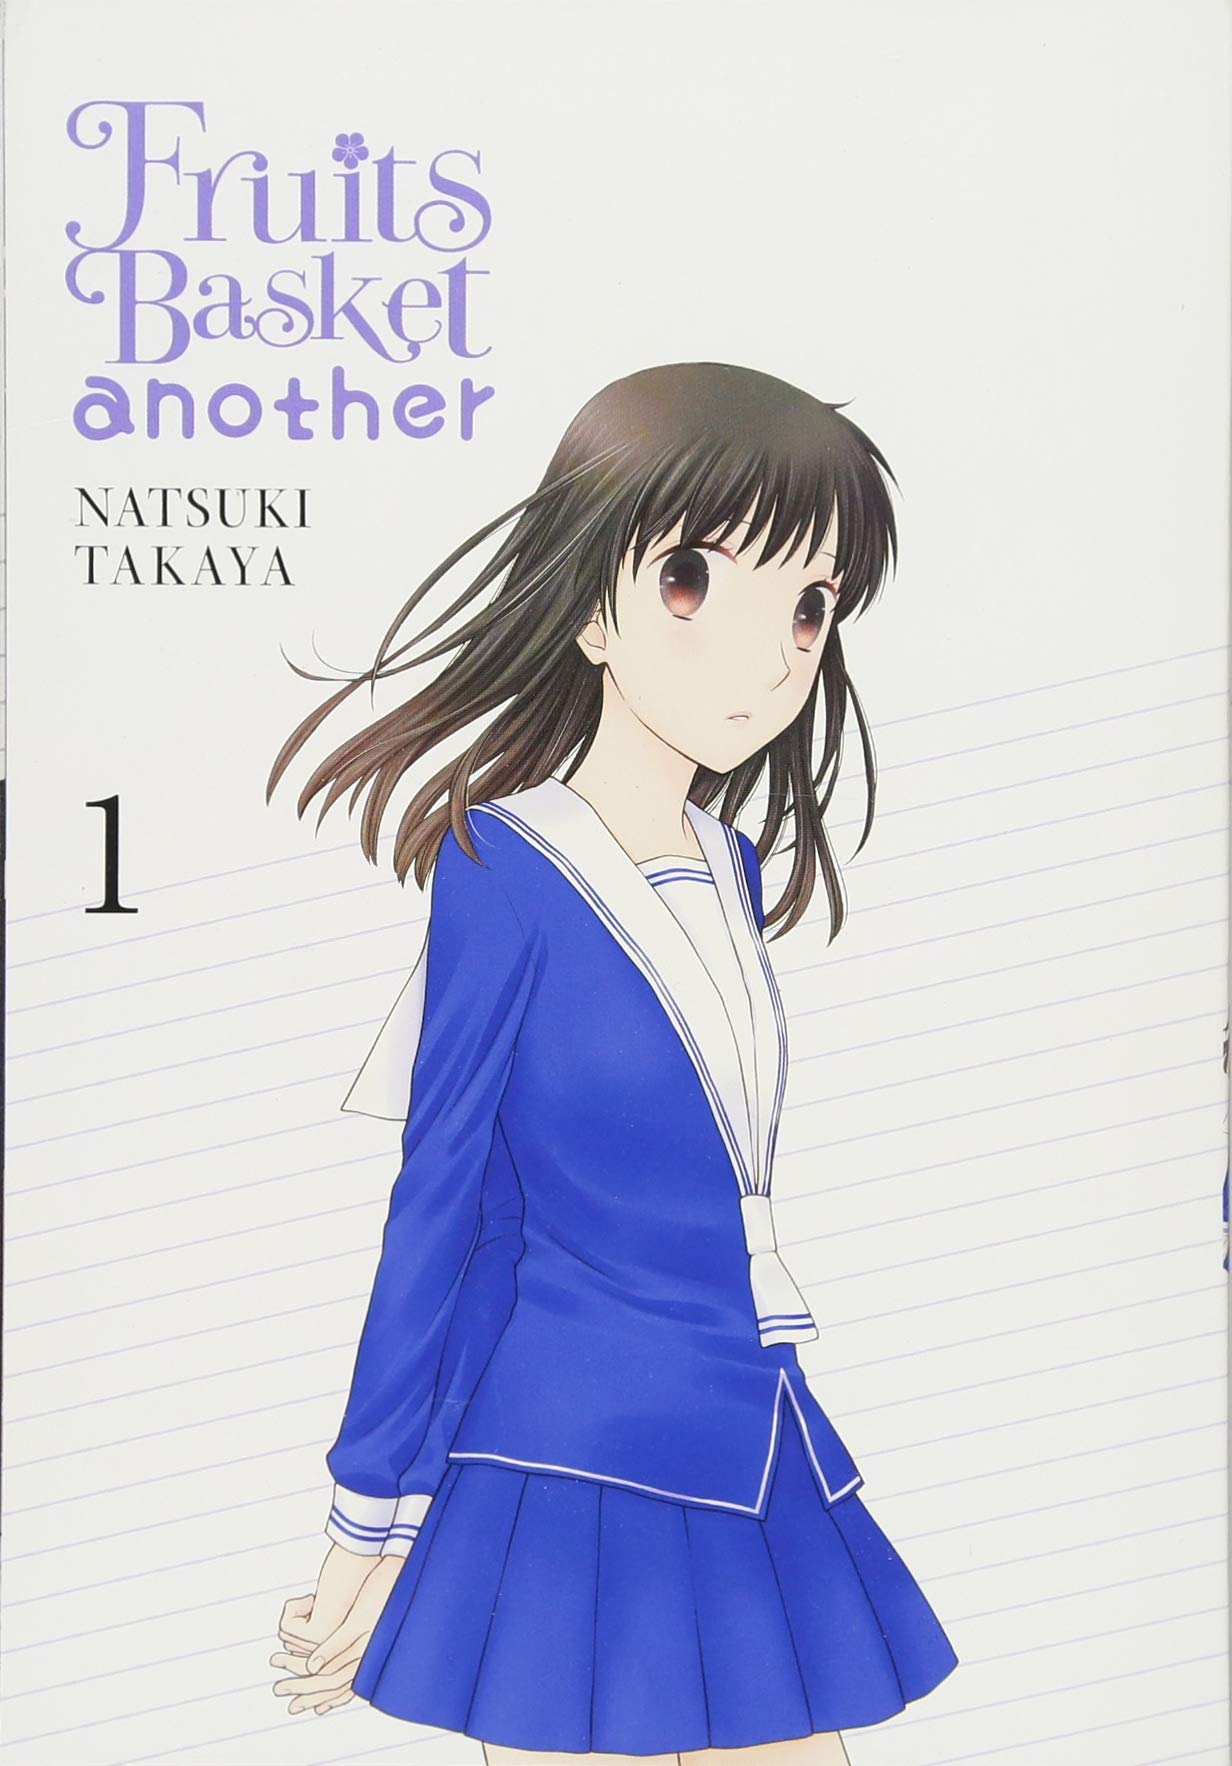 Image for "Fruits Basket Another: Volume 1"